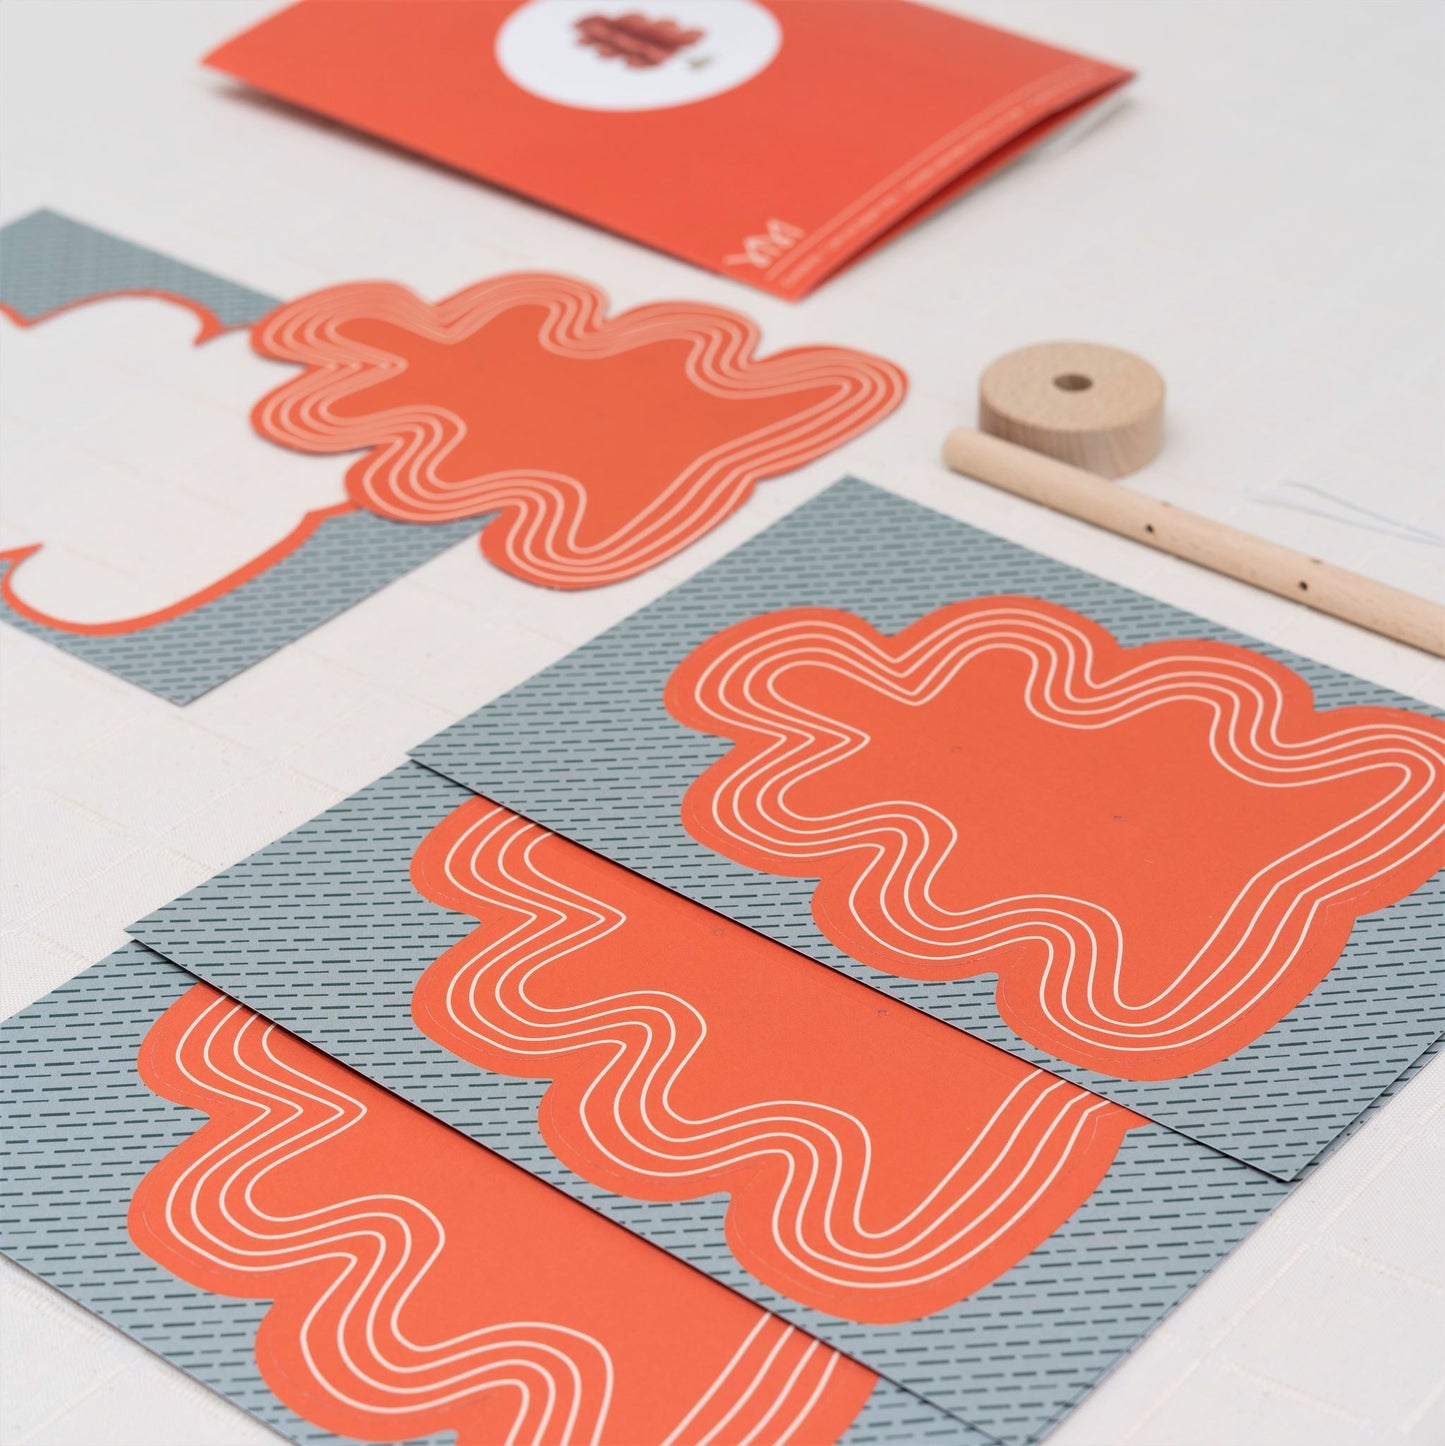 a red oak tree paper craft kit by Jurianne Matter, showing the pieces ready to assemble